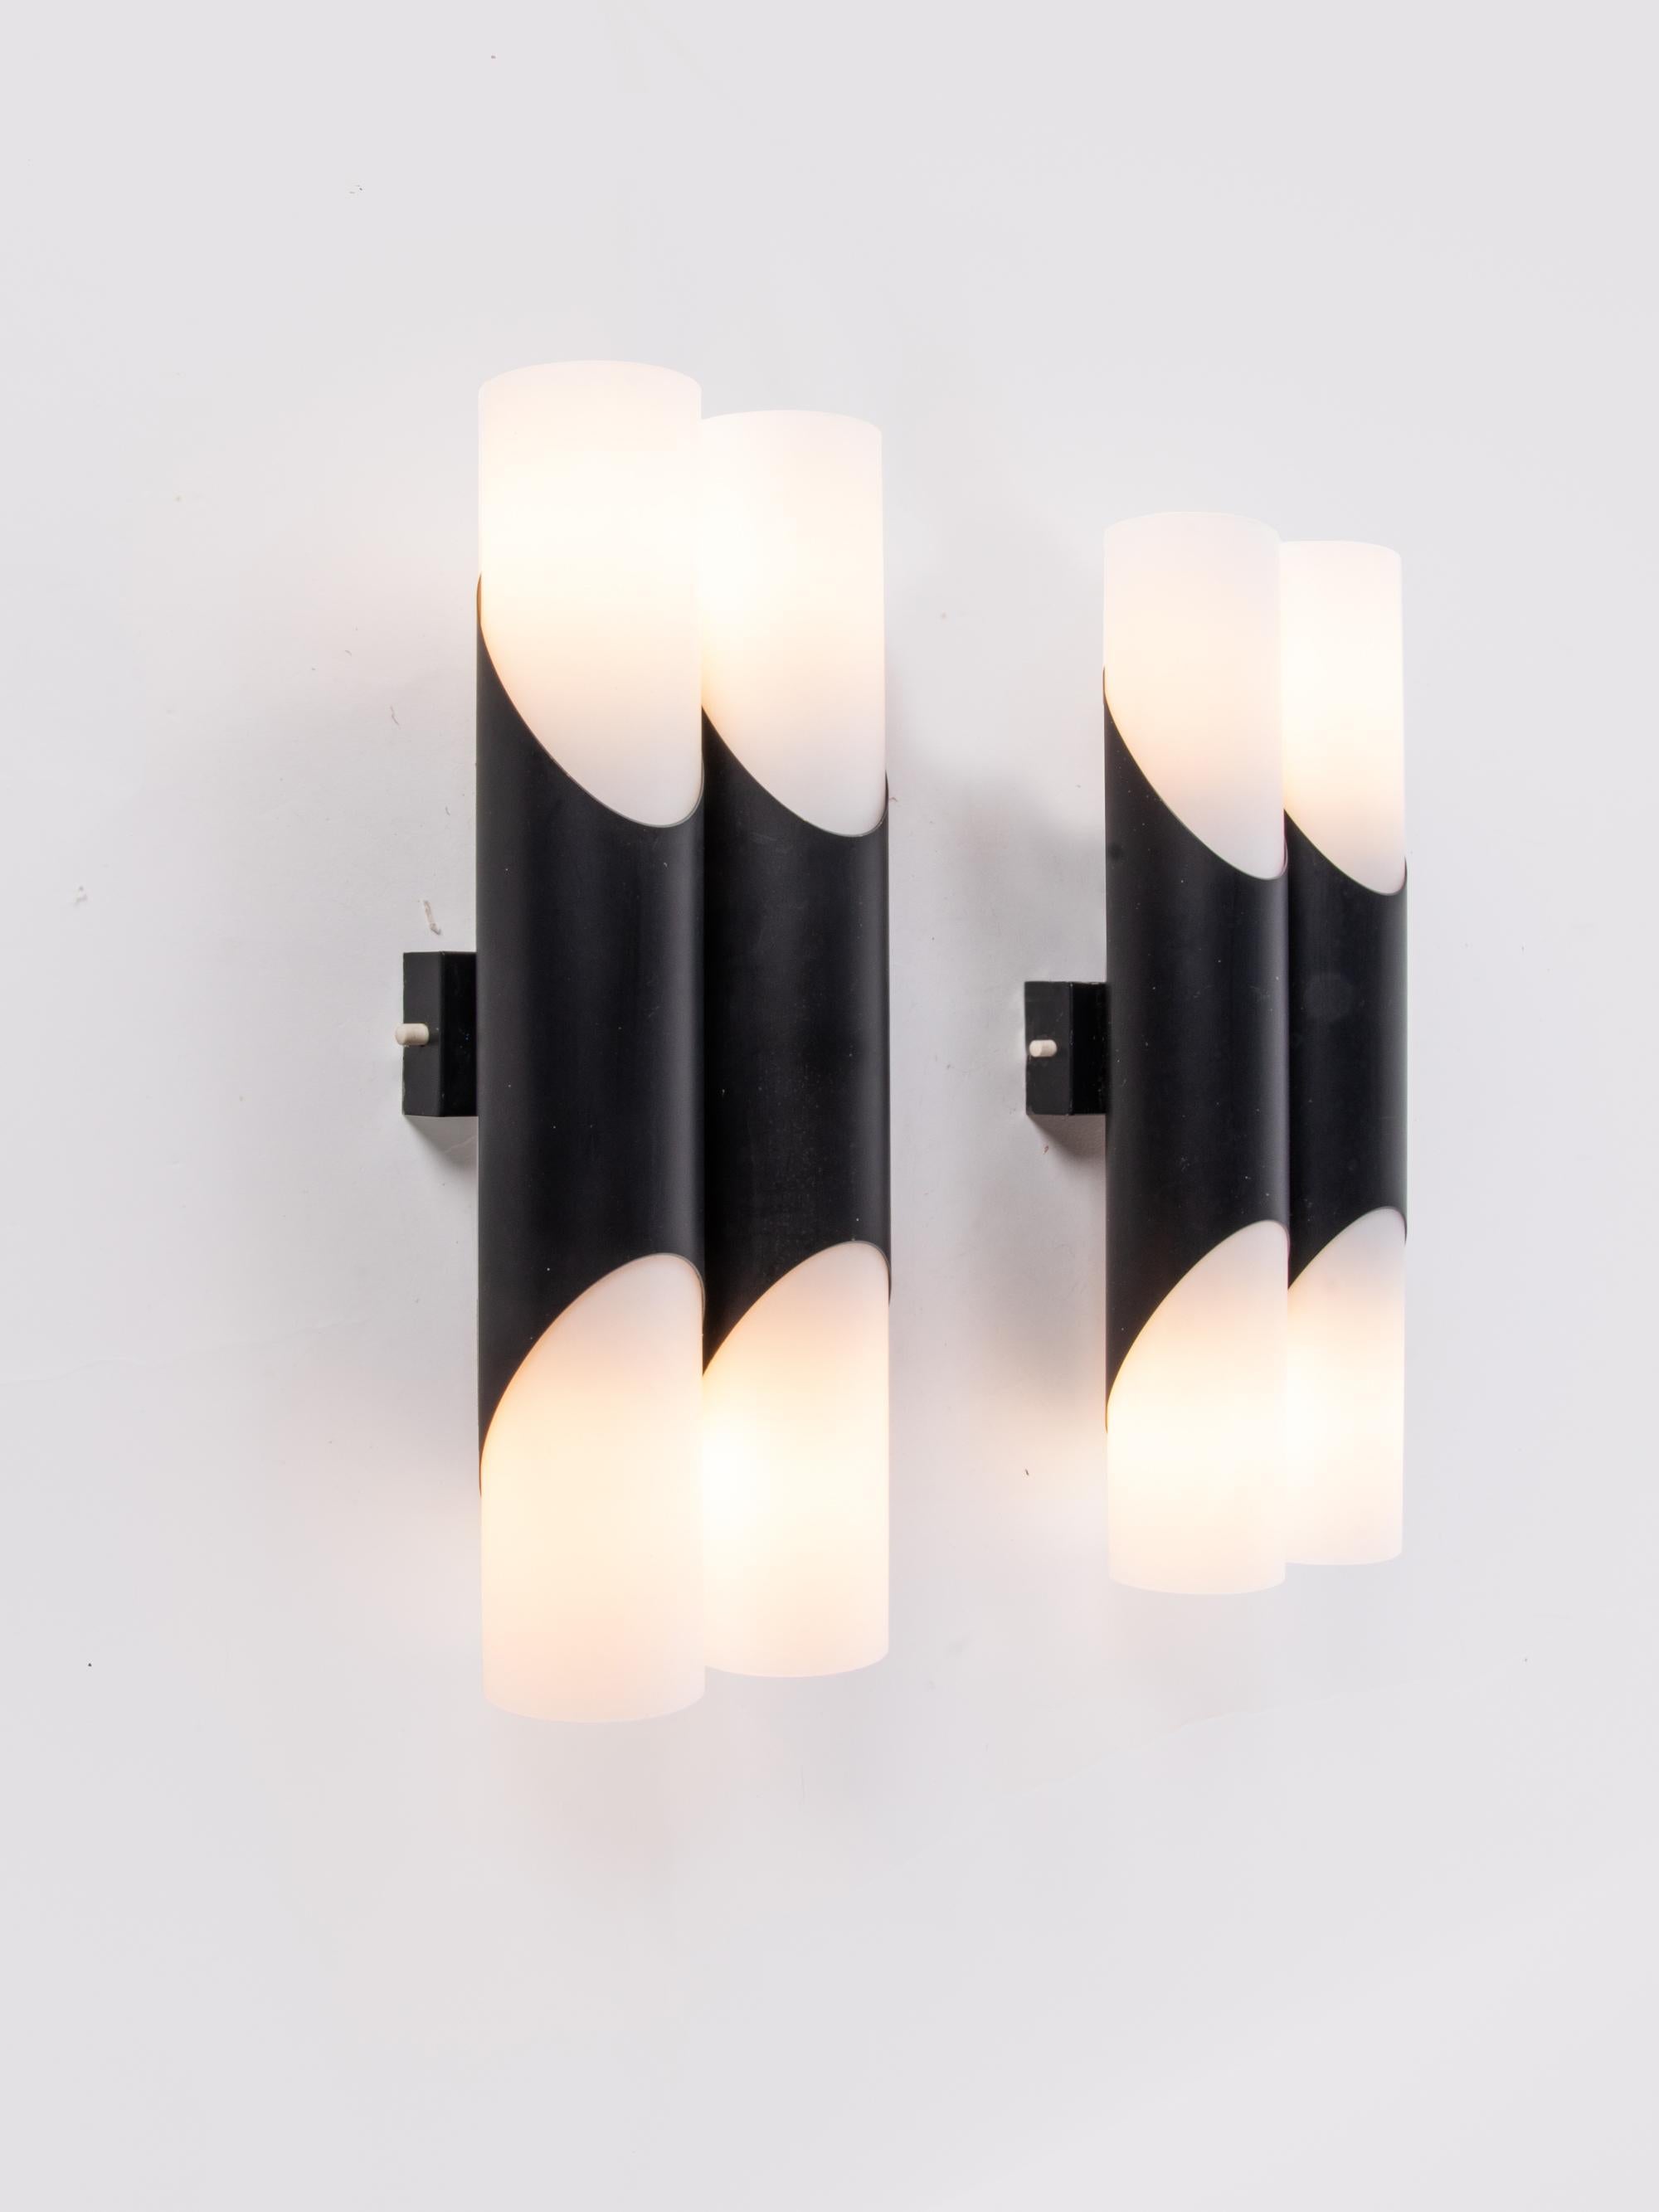 1 (of 2) Pair of 1970 Germany Neuhaus Double Glass Wall Lights black and white For Sale 1